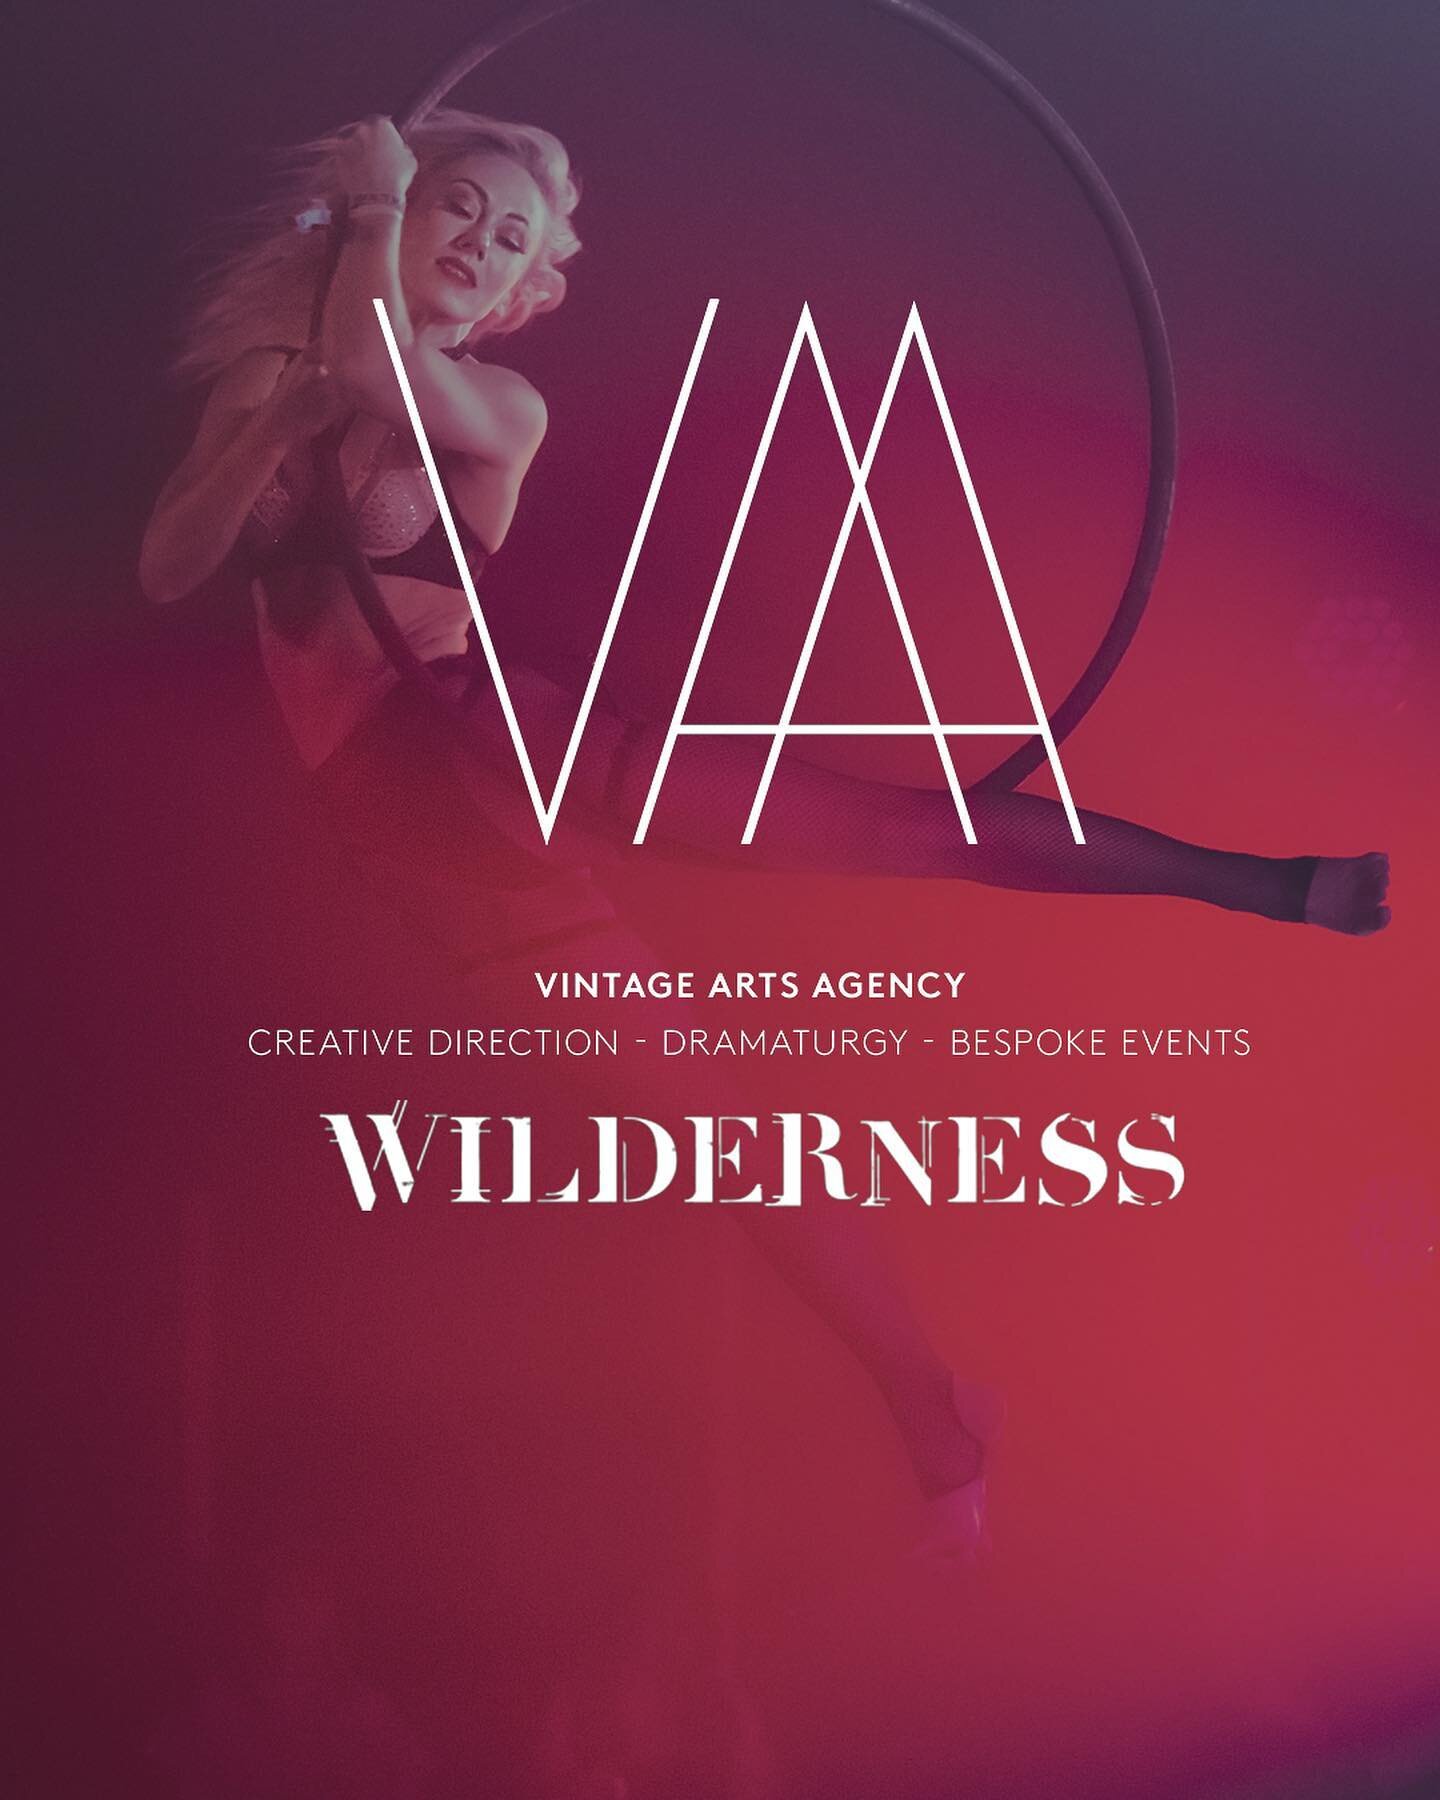 VINTAGE ARTS AGENCY x WILDERNESS 2021

As we prepare for our biggest yet event with @wildernesshq this year, we can&rsquo;t help but reflect fondly on previous shows in the legendary House of Sublime. 

In association with House of Fatale, VAA brings